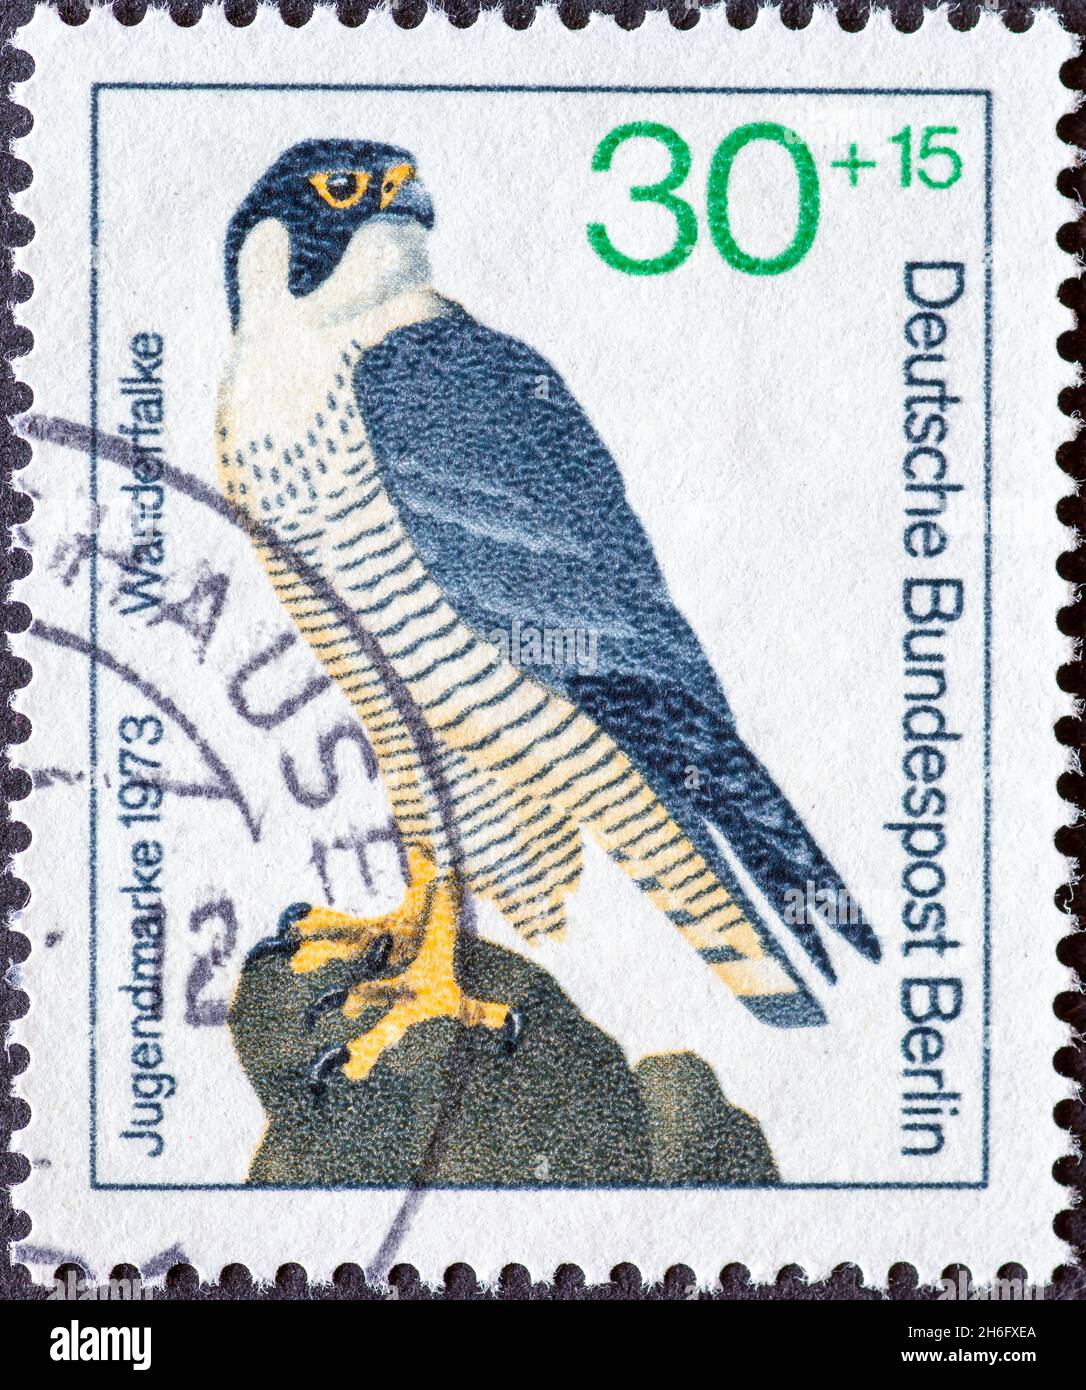 GERMANY, Berlin - CIRCA 1973: a postage stamp from Germany, Berlin showing a drawing of the bird of prey peregrine falcon. charity youth postal stamp Stock Photo